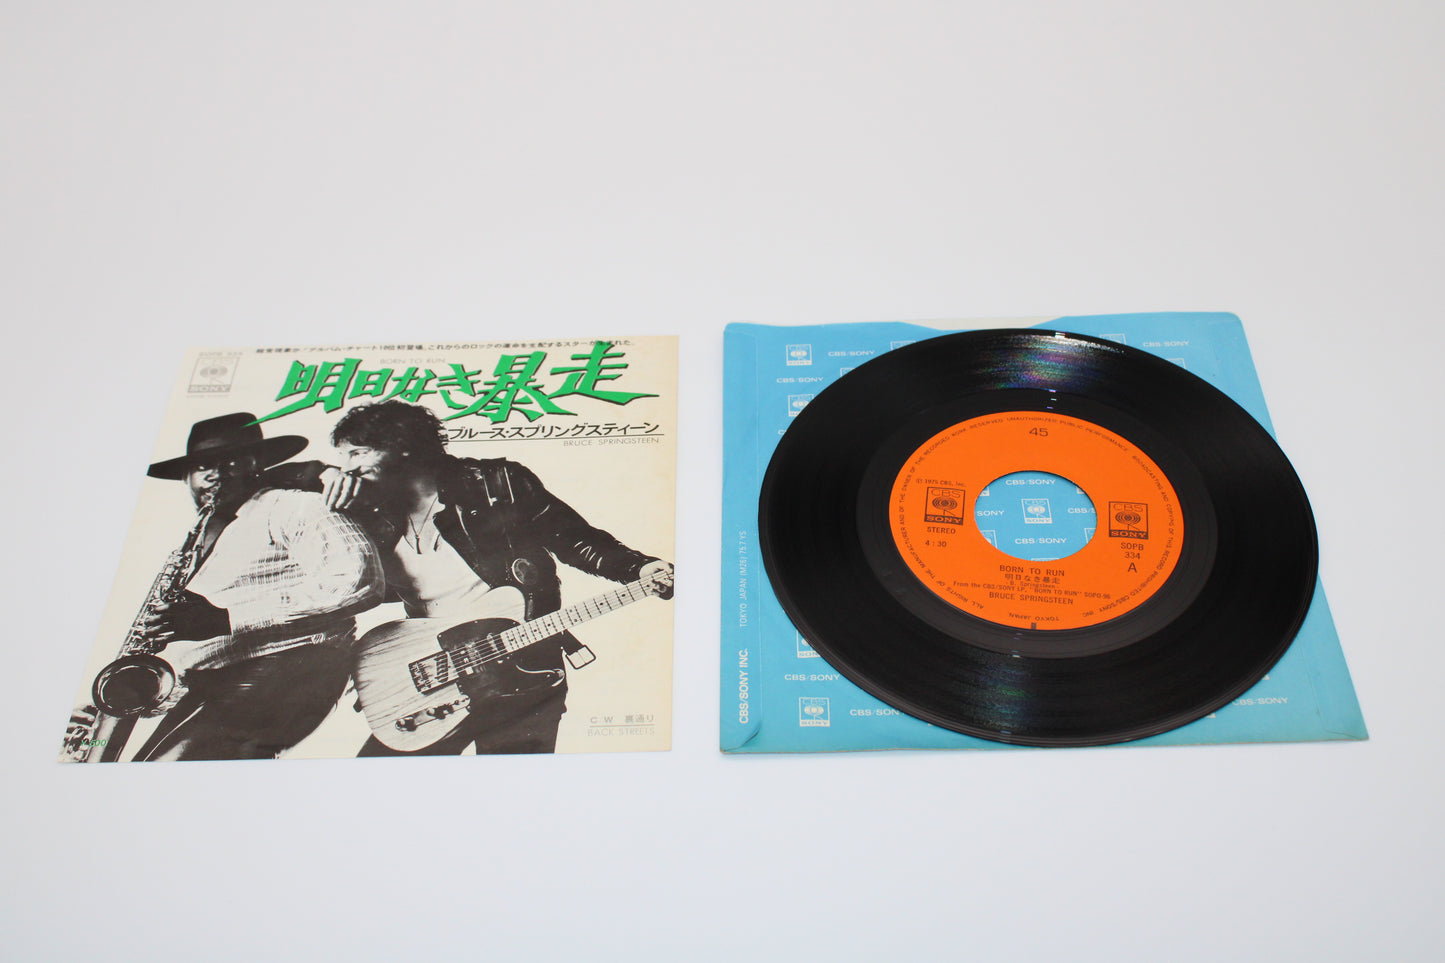 Bruce Springsteen 明日なき暴走 = Born To Run 45 record w/blue jacket - Japan Release 1975 Collectible